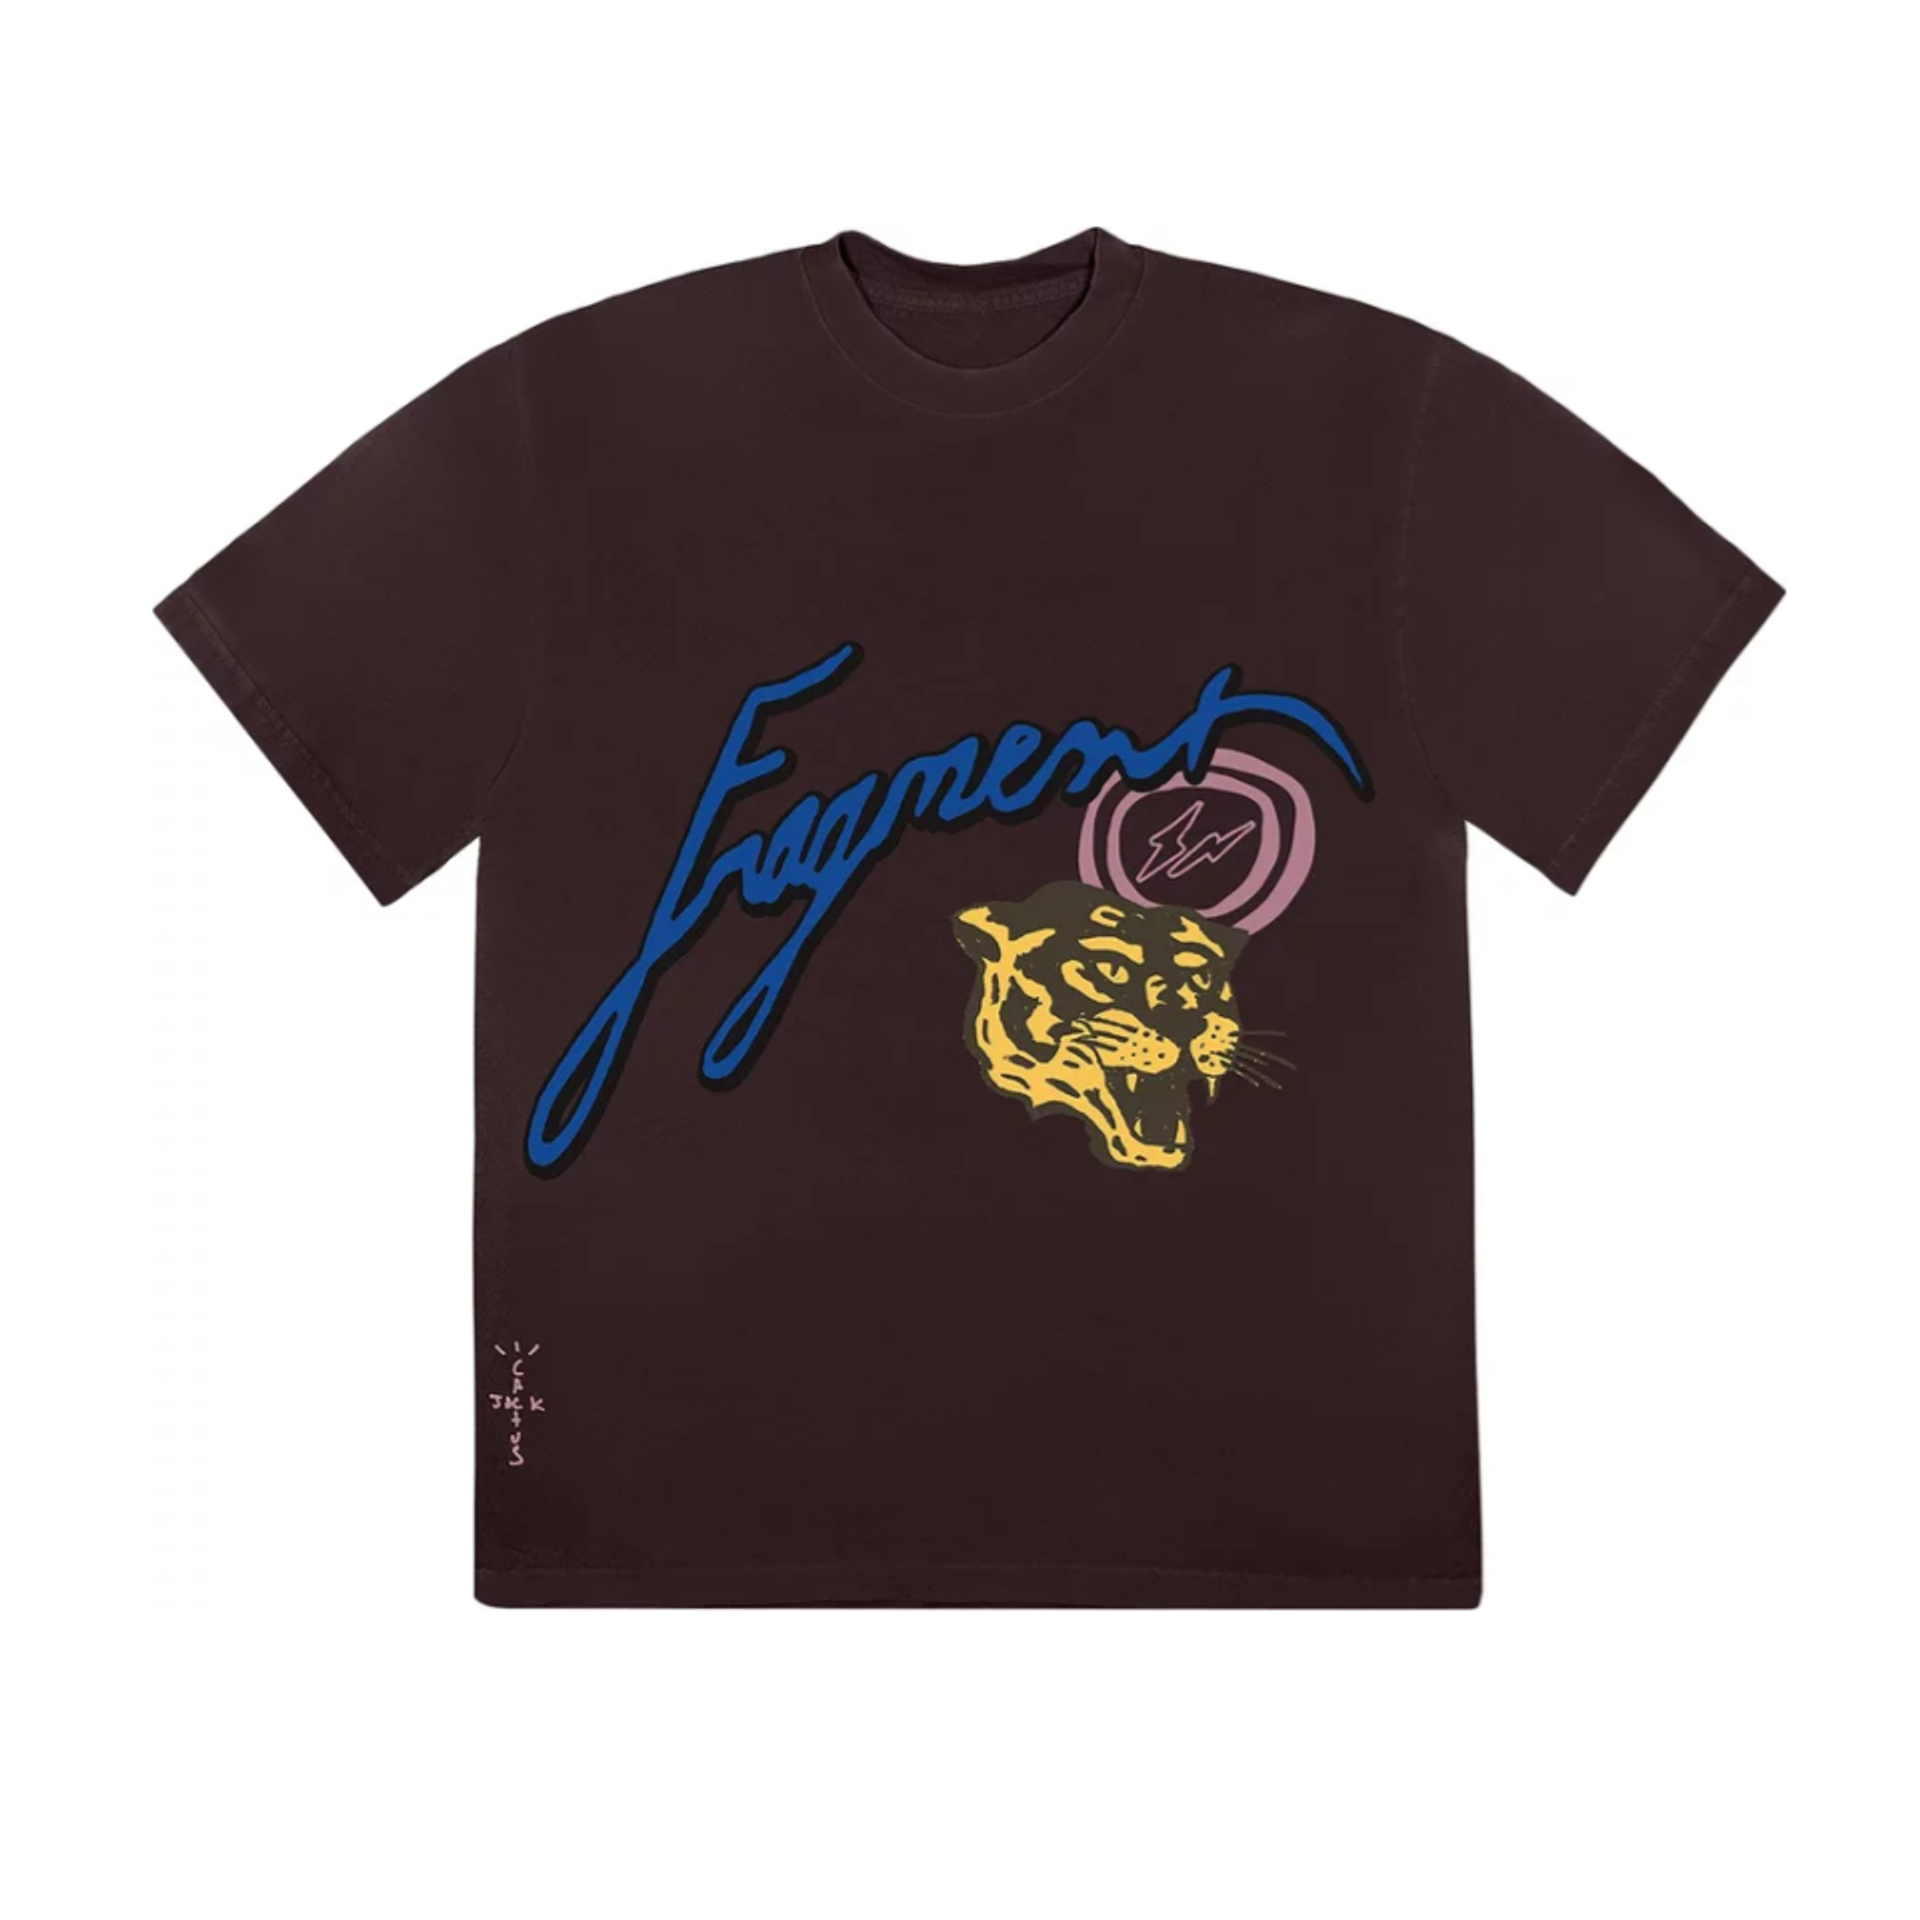 Cactus Jack by Travis Scott For Fragment Icons Tee 'Brown'